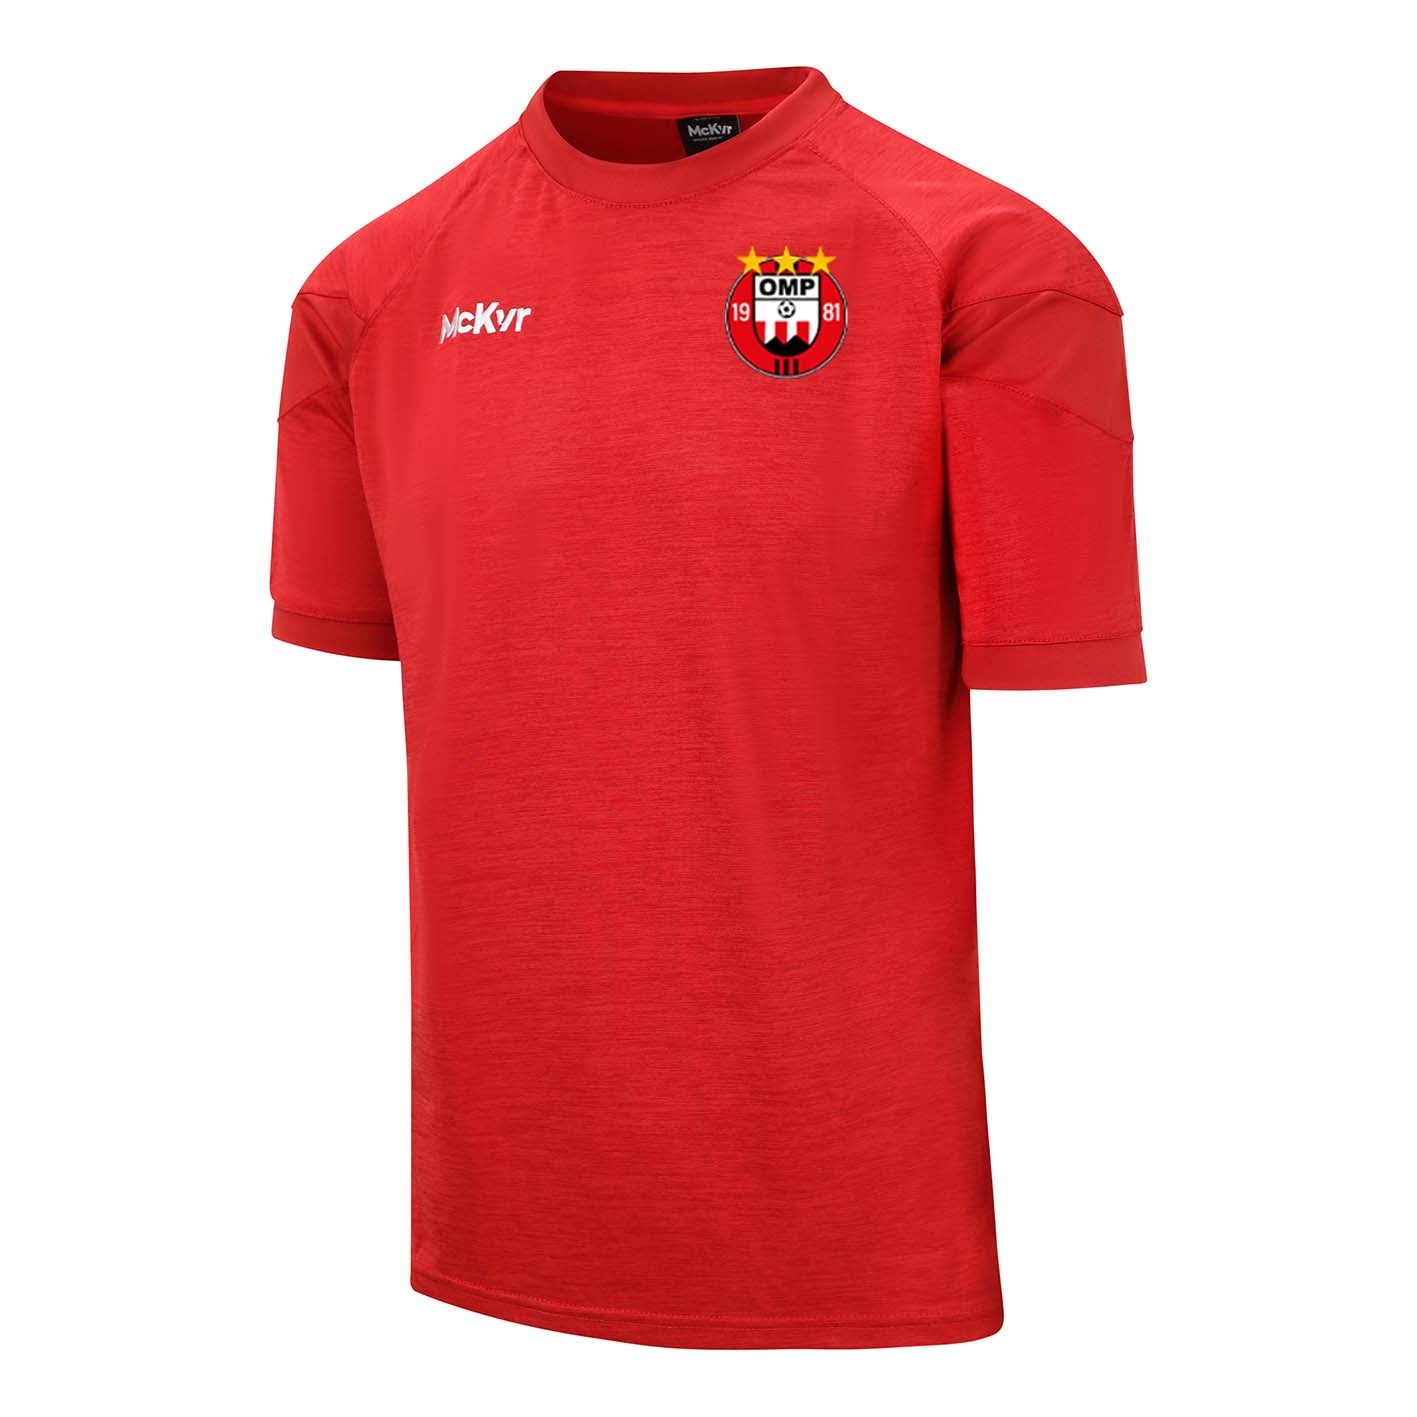 Mc Keever OMP United Core 22 T-Shirt - Youth - Red